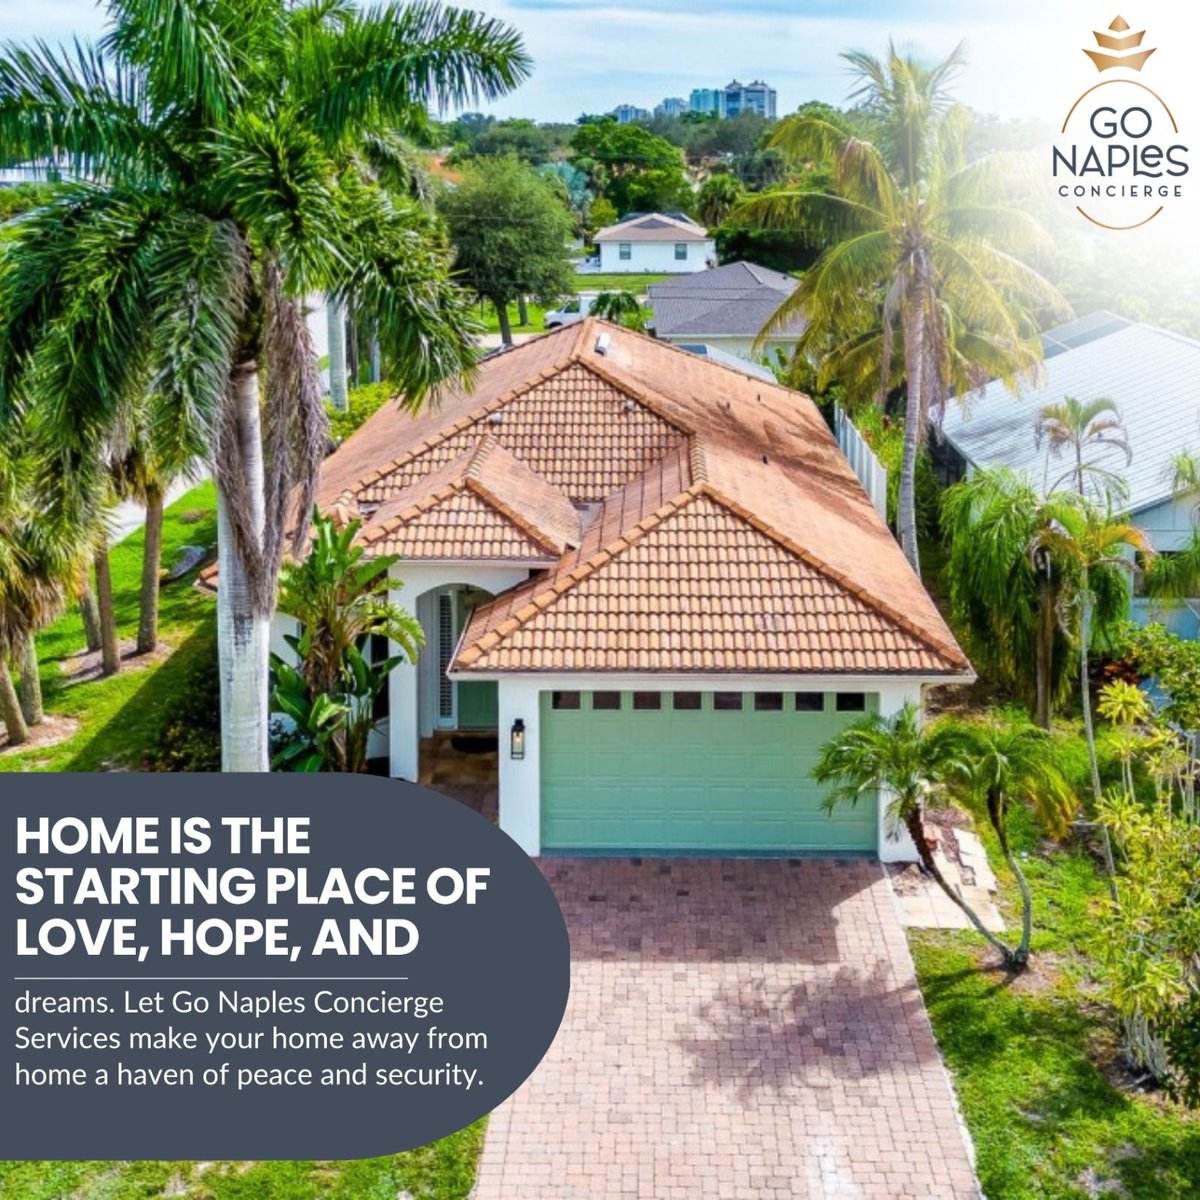 Home is the starting place of love, hope, and dreams.' – Unknown
.
🏡✨ Let Go Naples Concierge Services make your home away from home a haven of peace and security.
--
📞Contact us: (239) 360-3605 | Hello@gonaplesconcierge.com   
.
.
.
#NaplesBusiness #PropertyCare